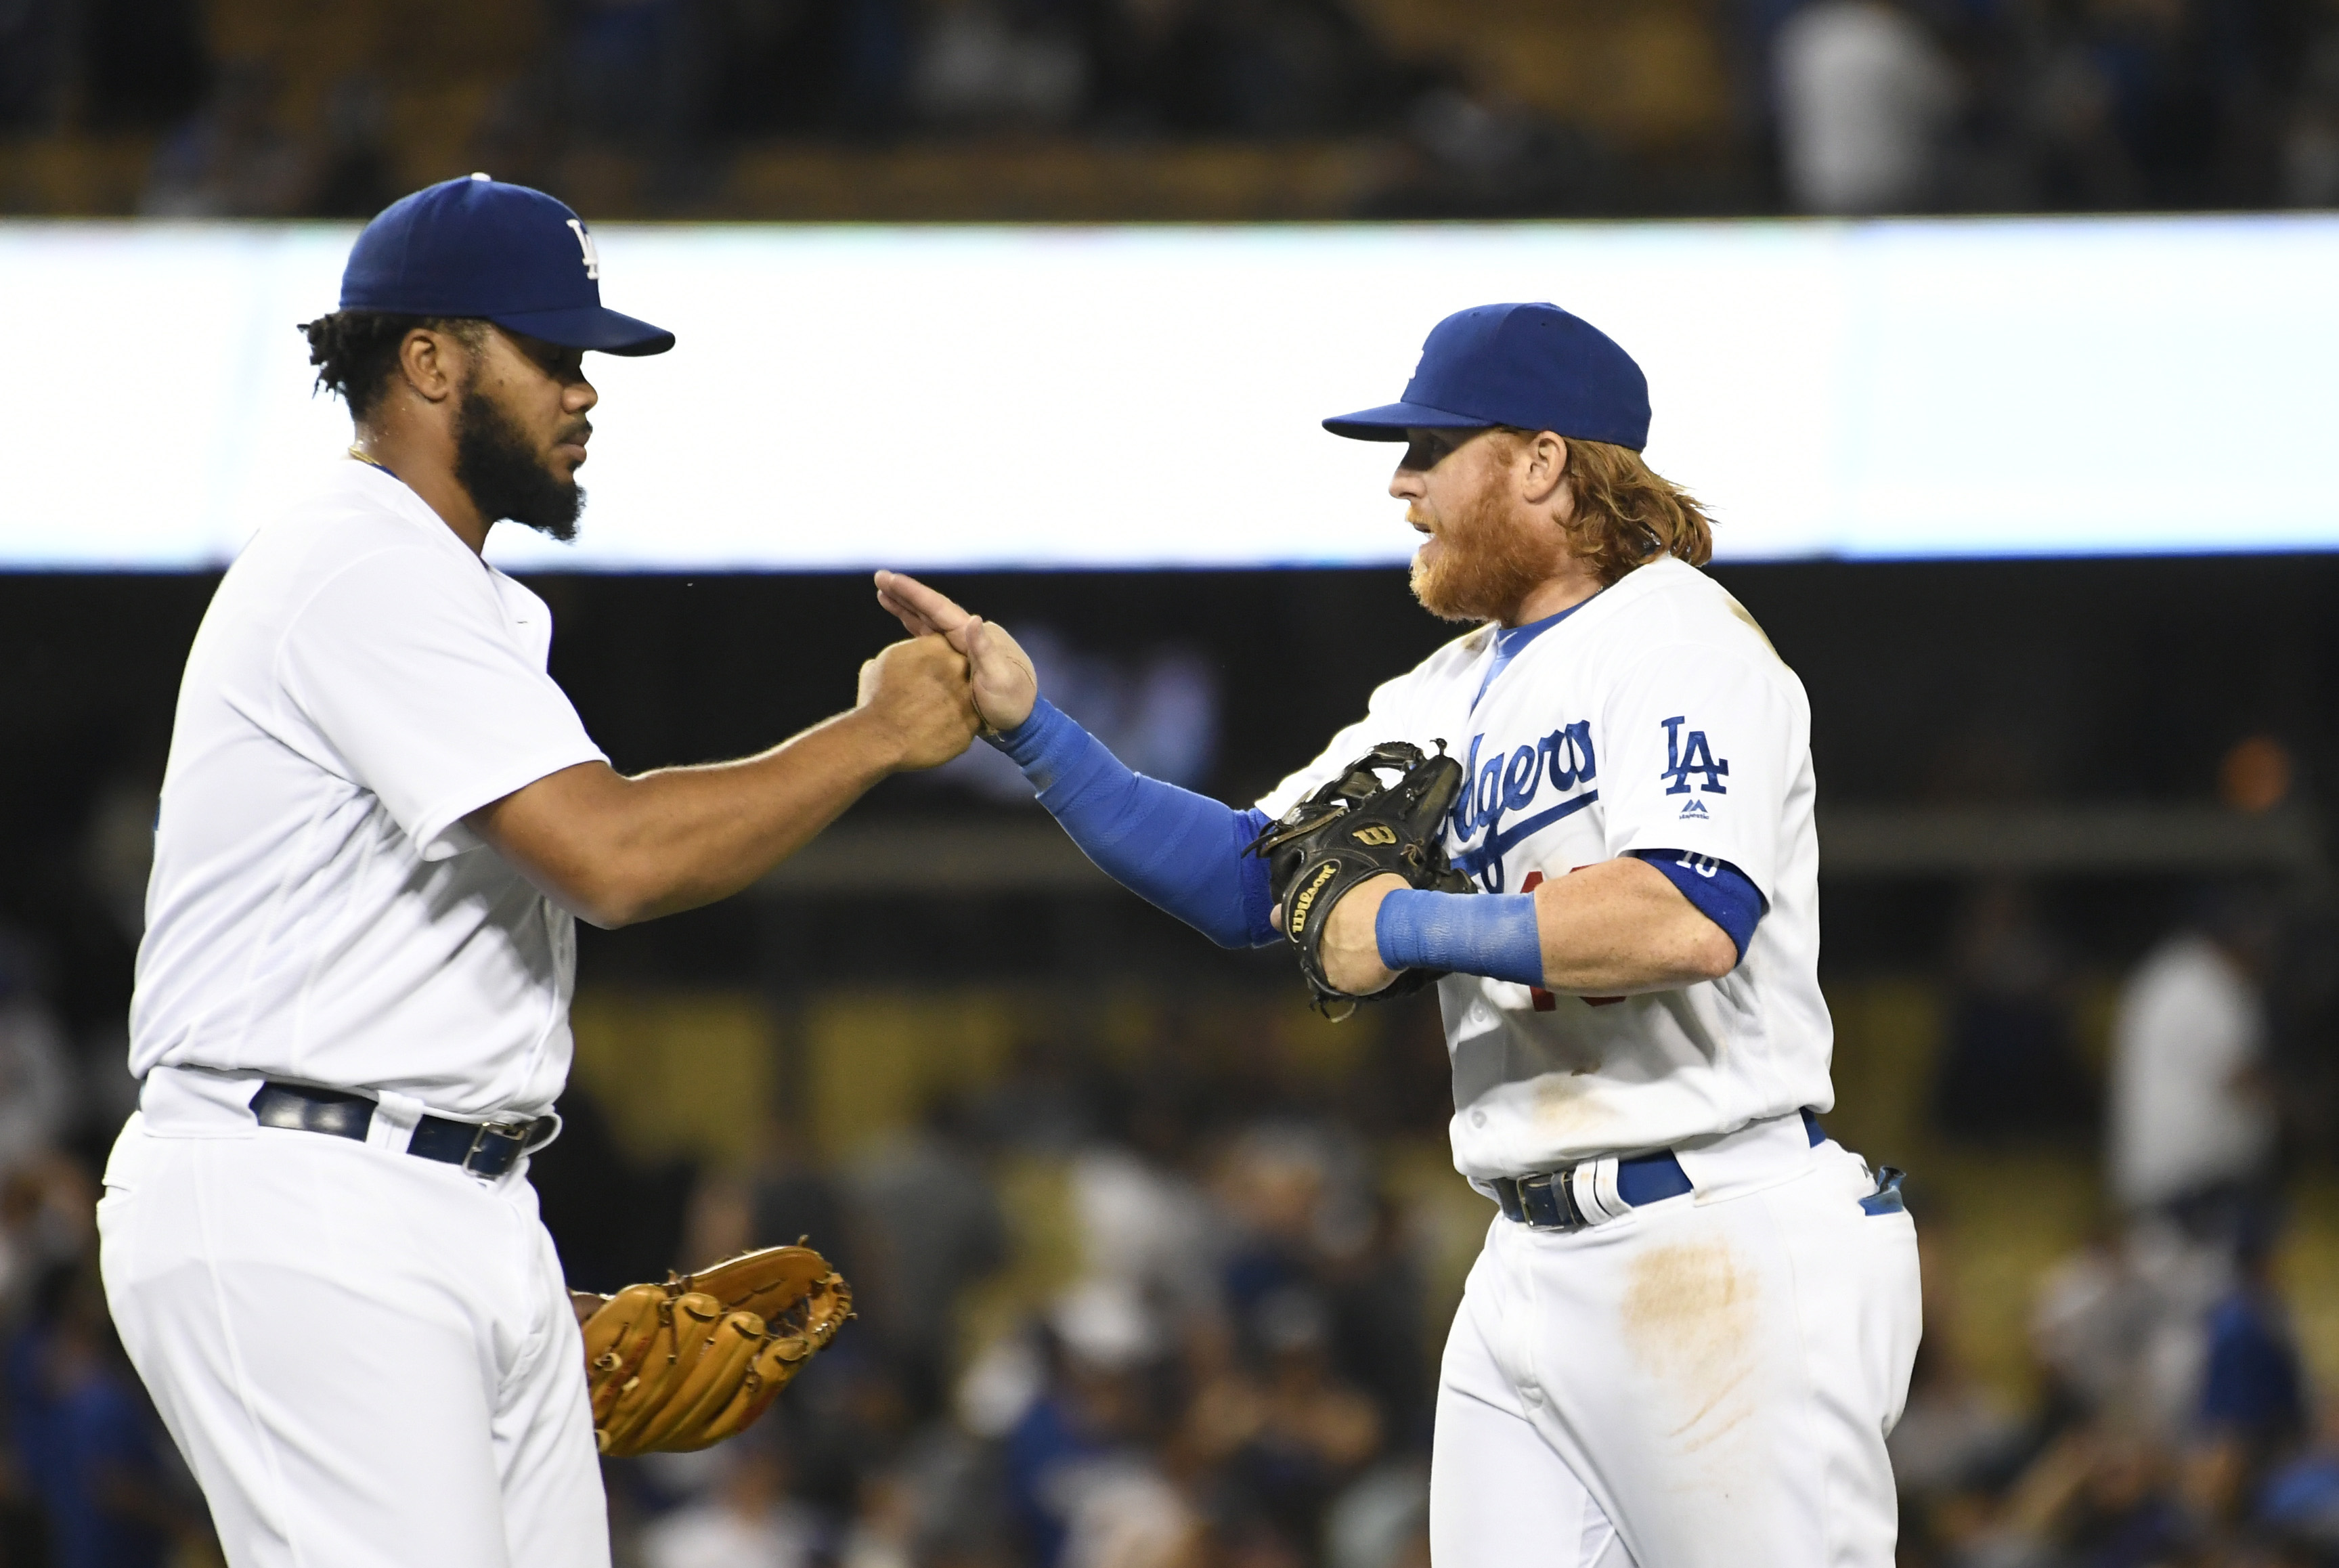 Dodgers instantly give Justin Turner's old No. 10 away in most